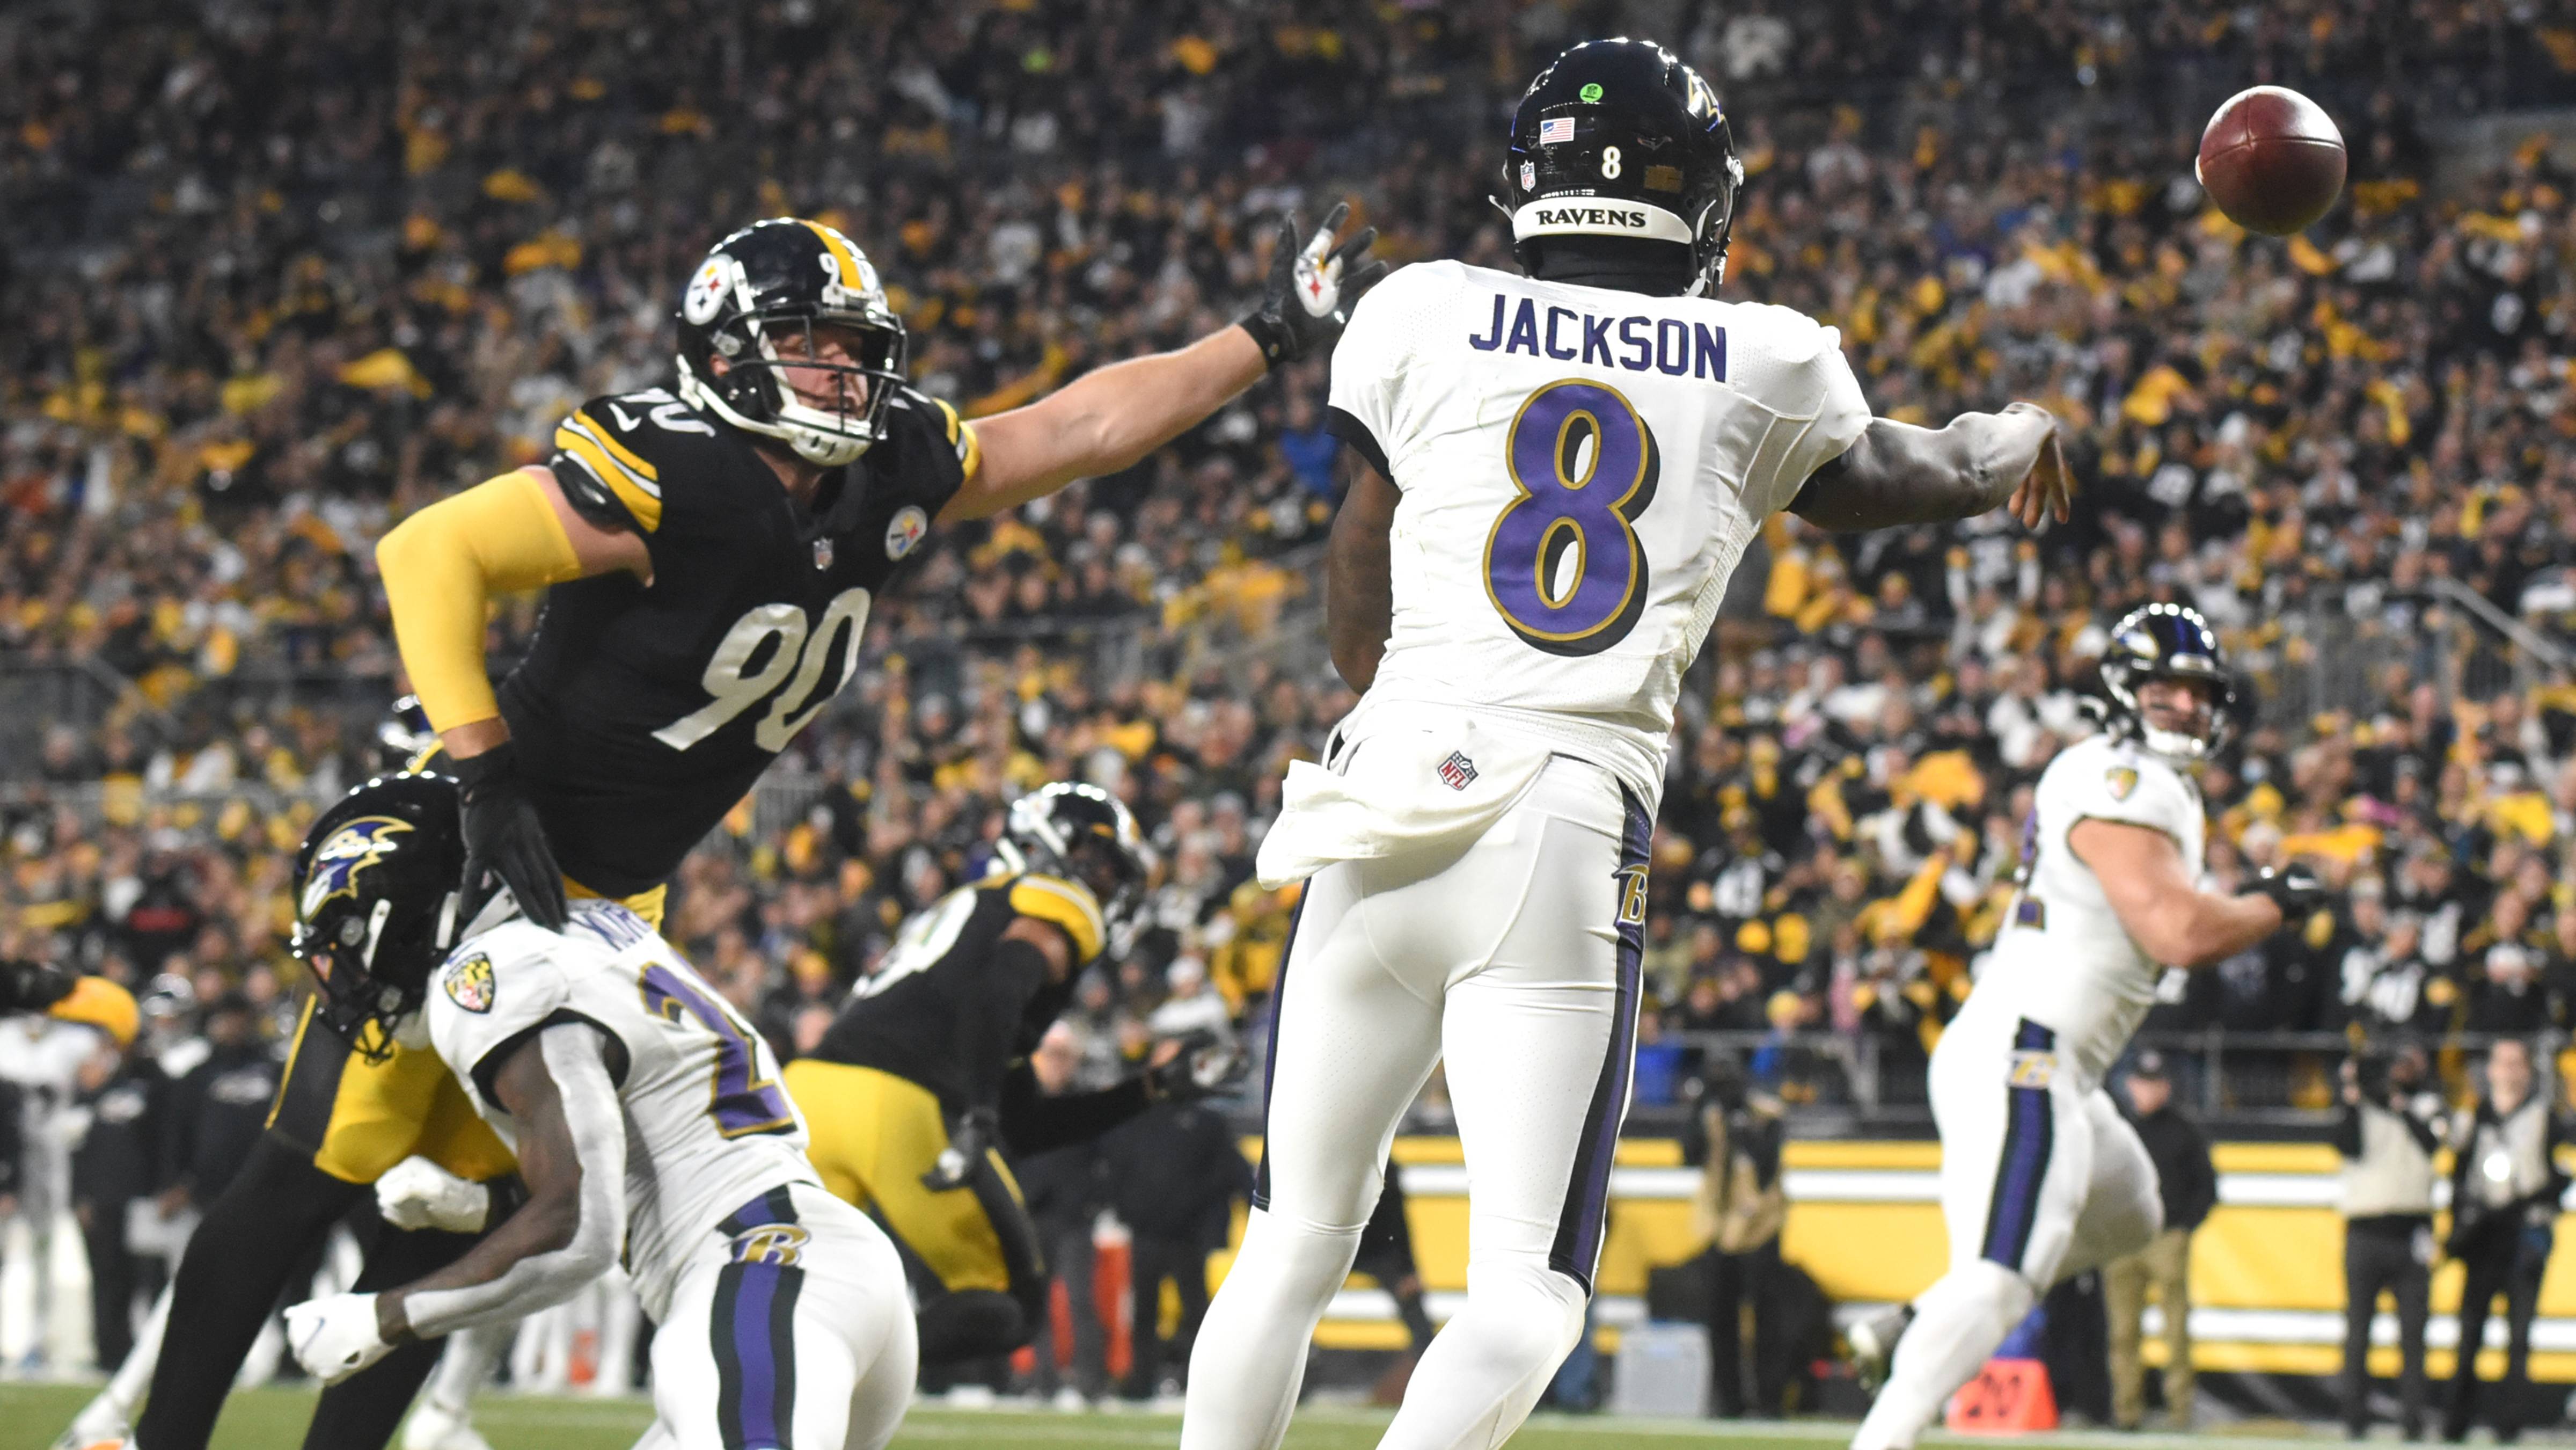 Ravens Lose to Steelers by 1 After Failed 2-Point Conversion